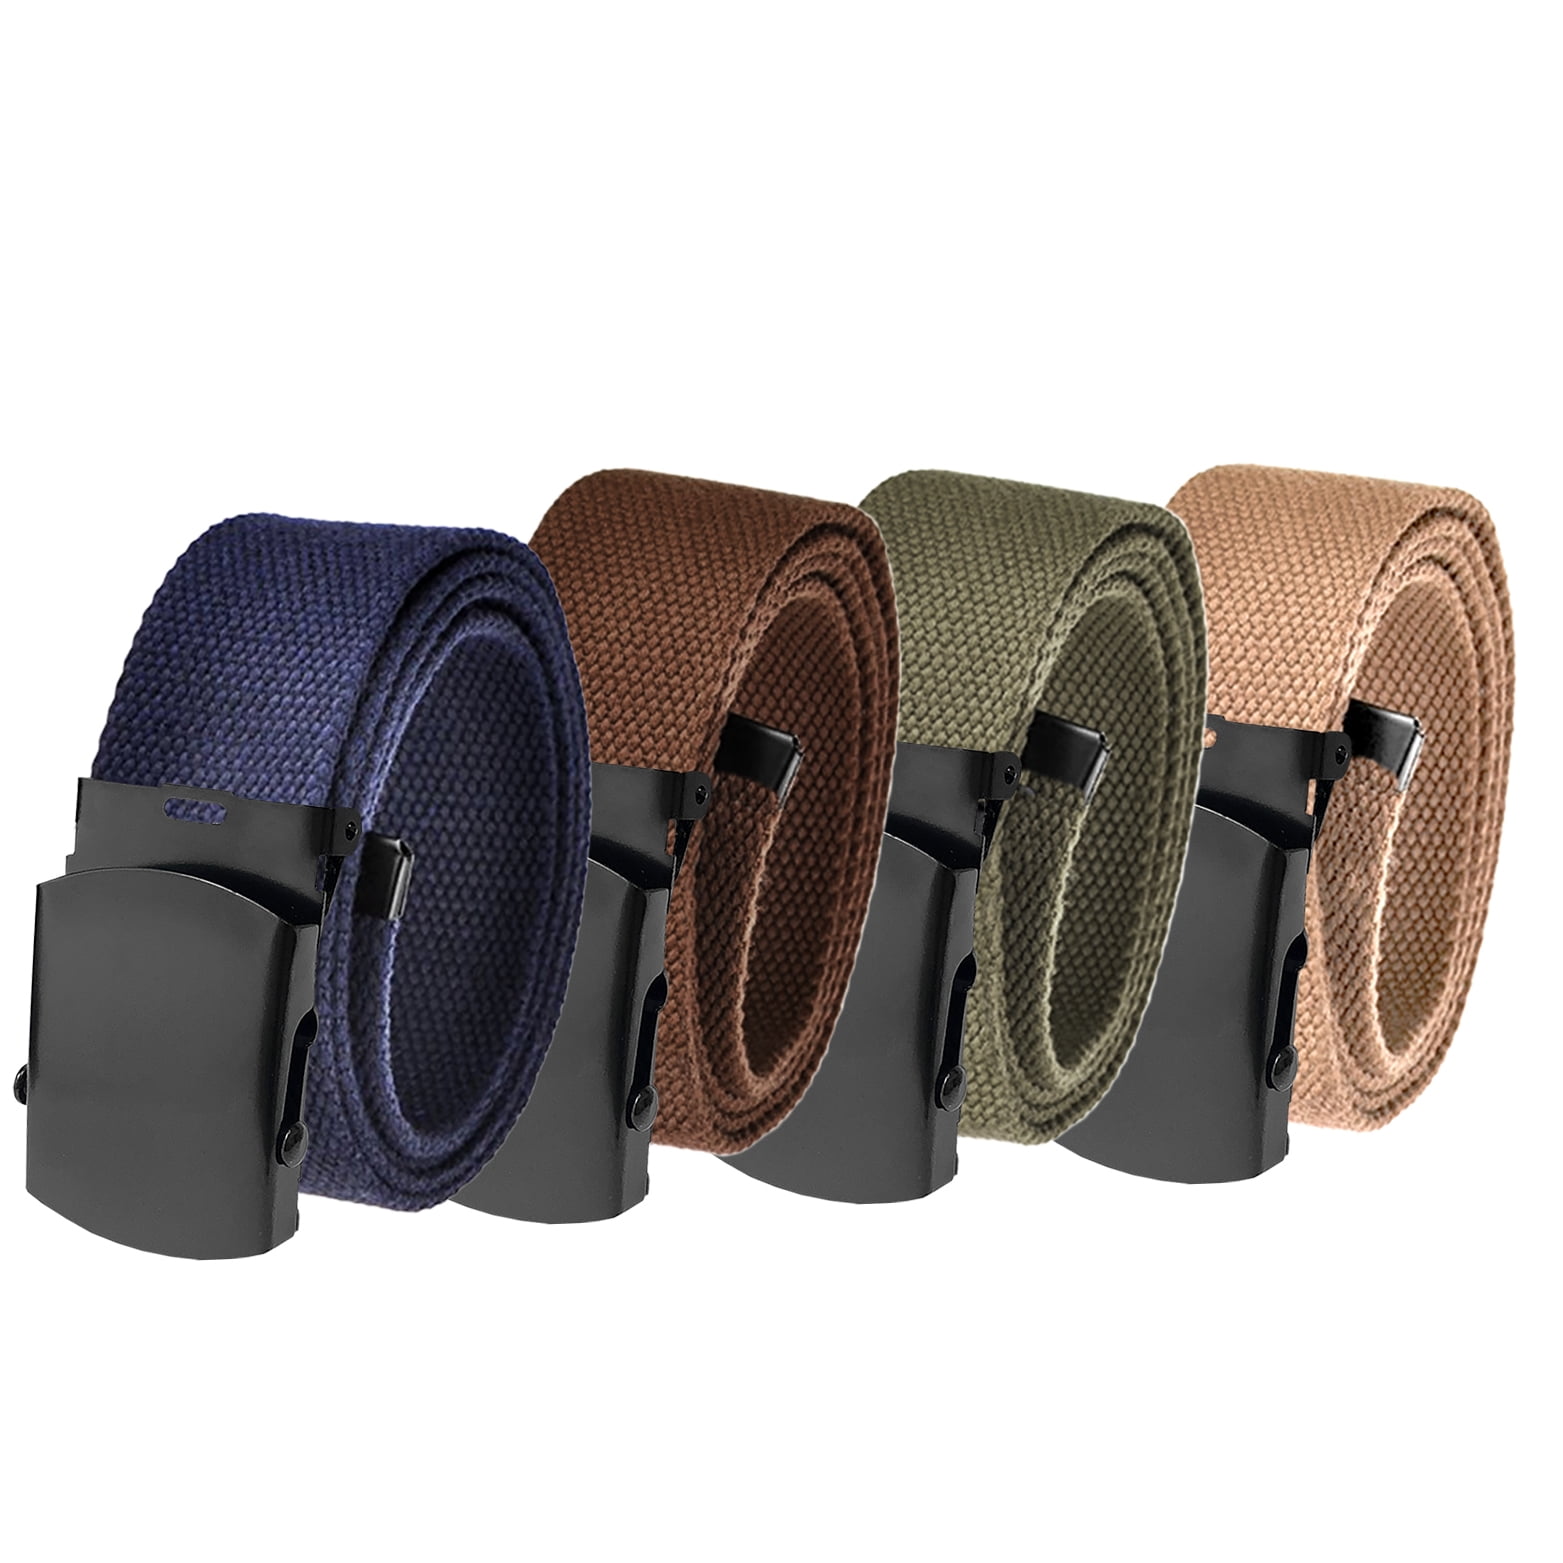 Canvas Web Belt Military Style with Matte Nickel Buckle and Tip 46" Black 